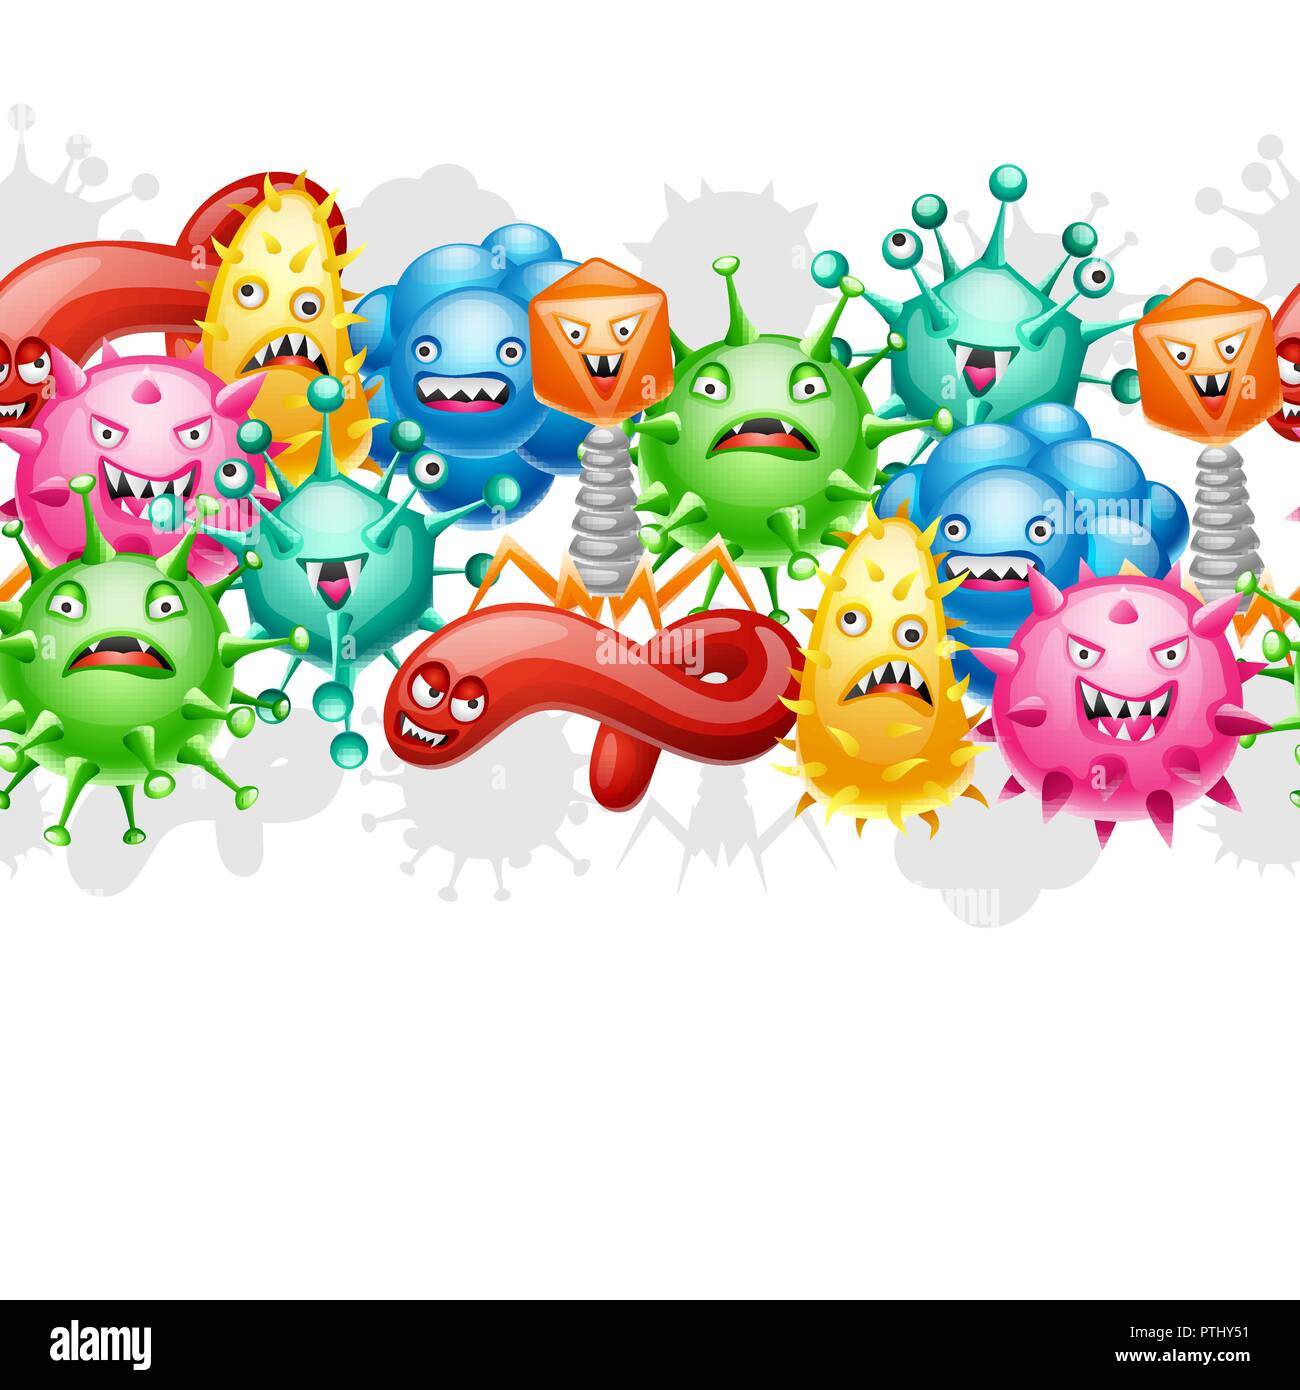 Seamless pattern with little angry viruses. Stock Vector